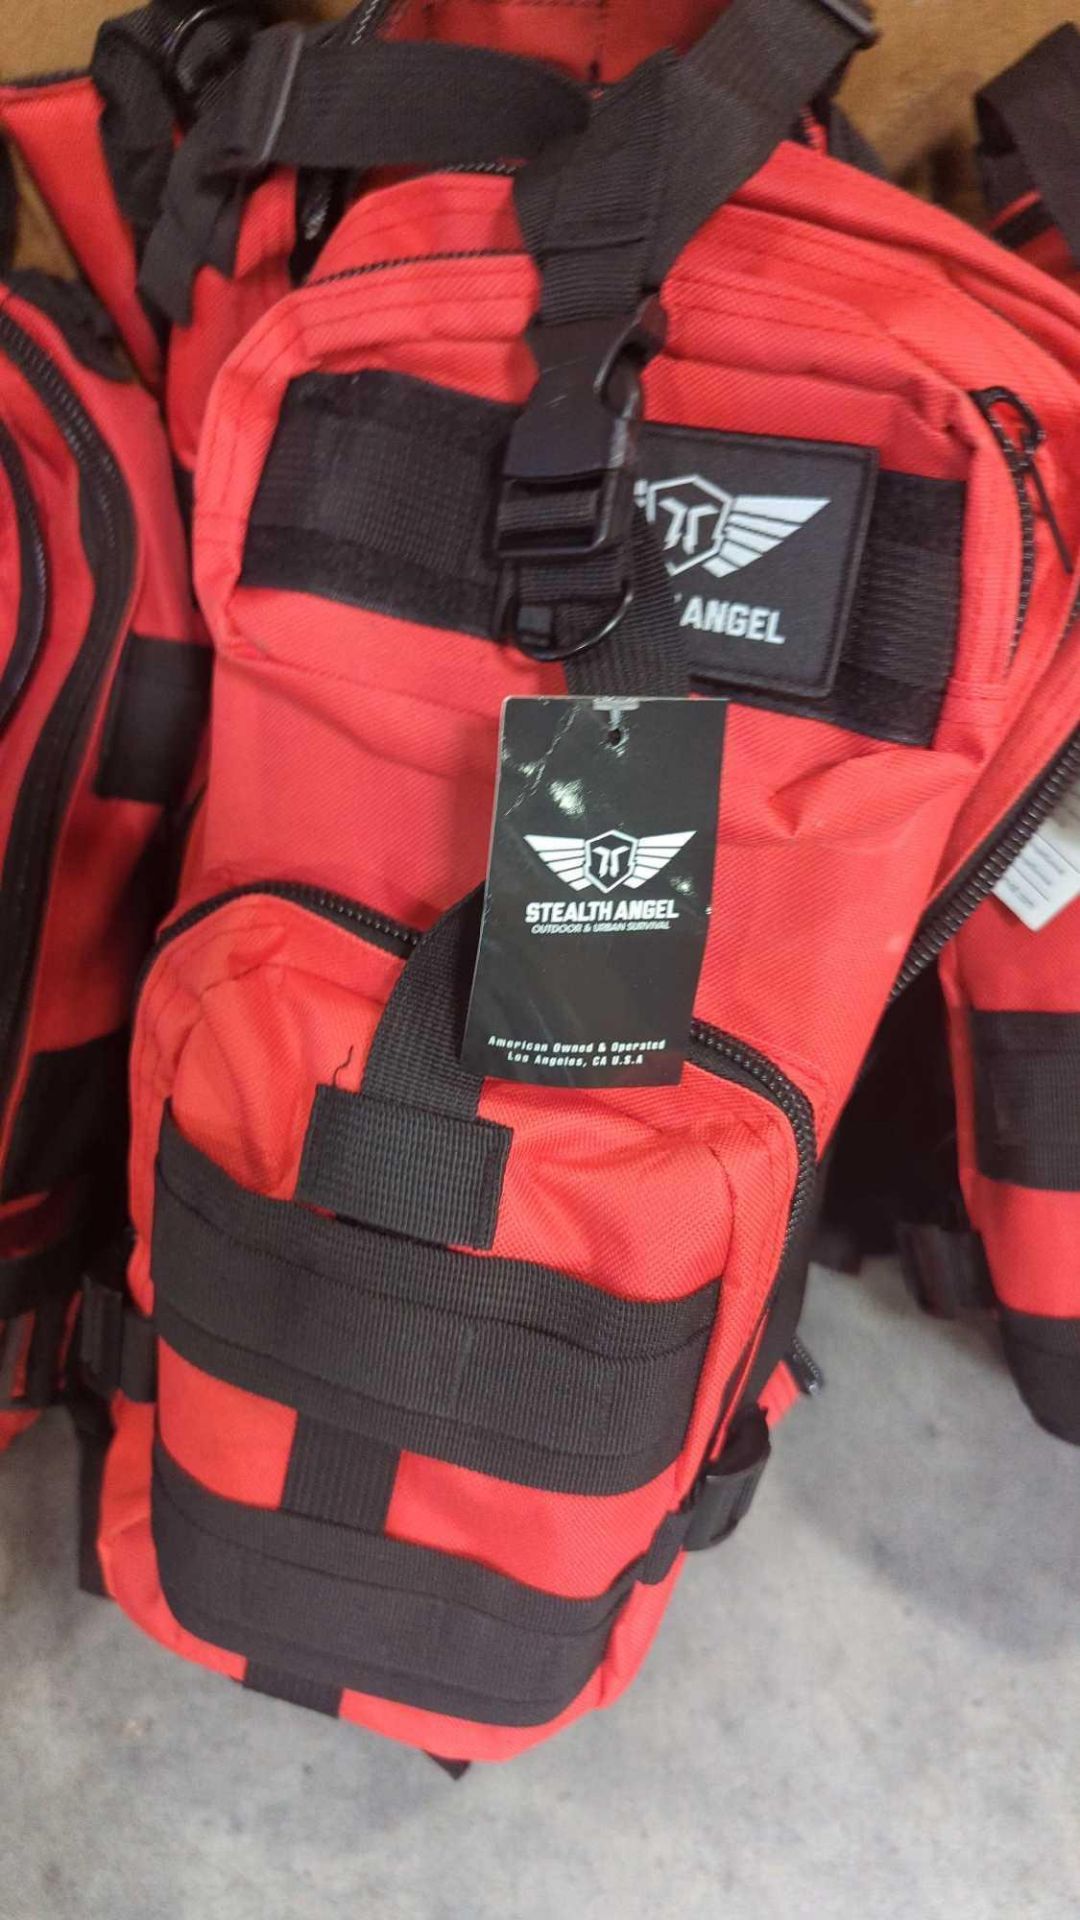 Stealth Angel backpacks and more - Image 4 of 14